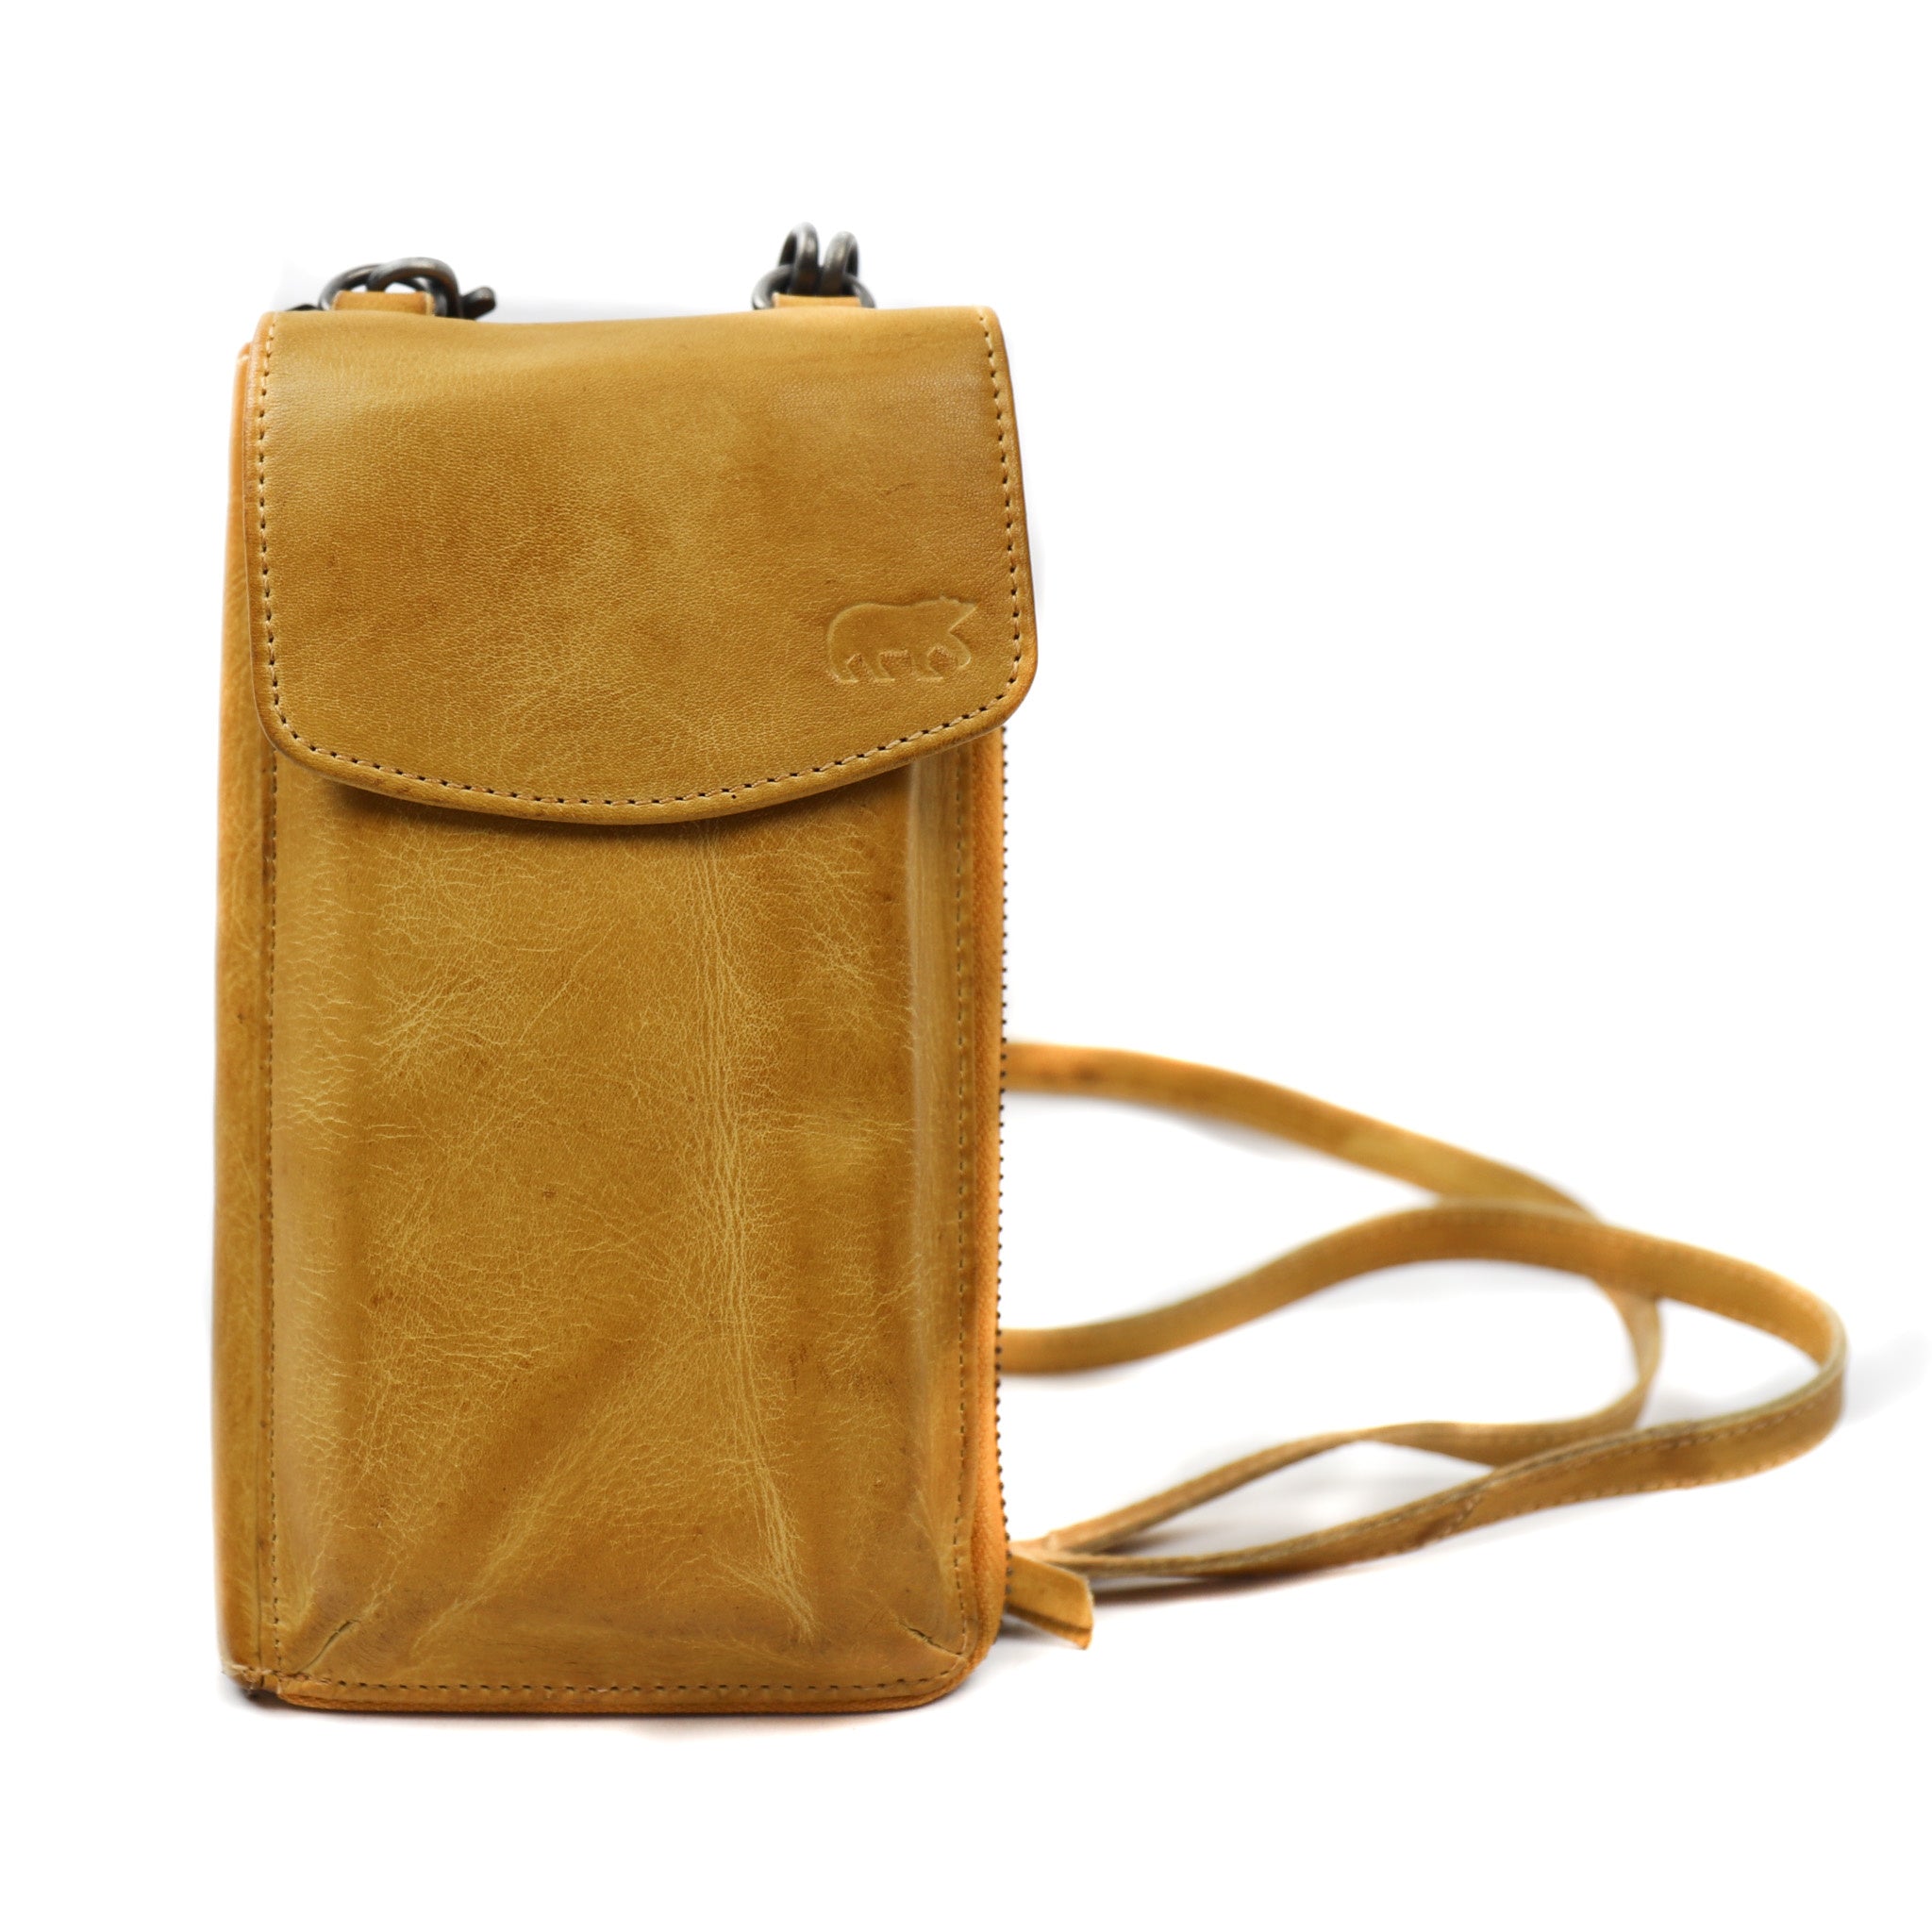 Phone bag 'Zoey' yellow - CP 6035